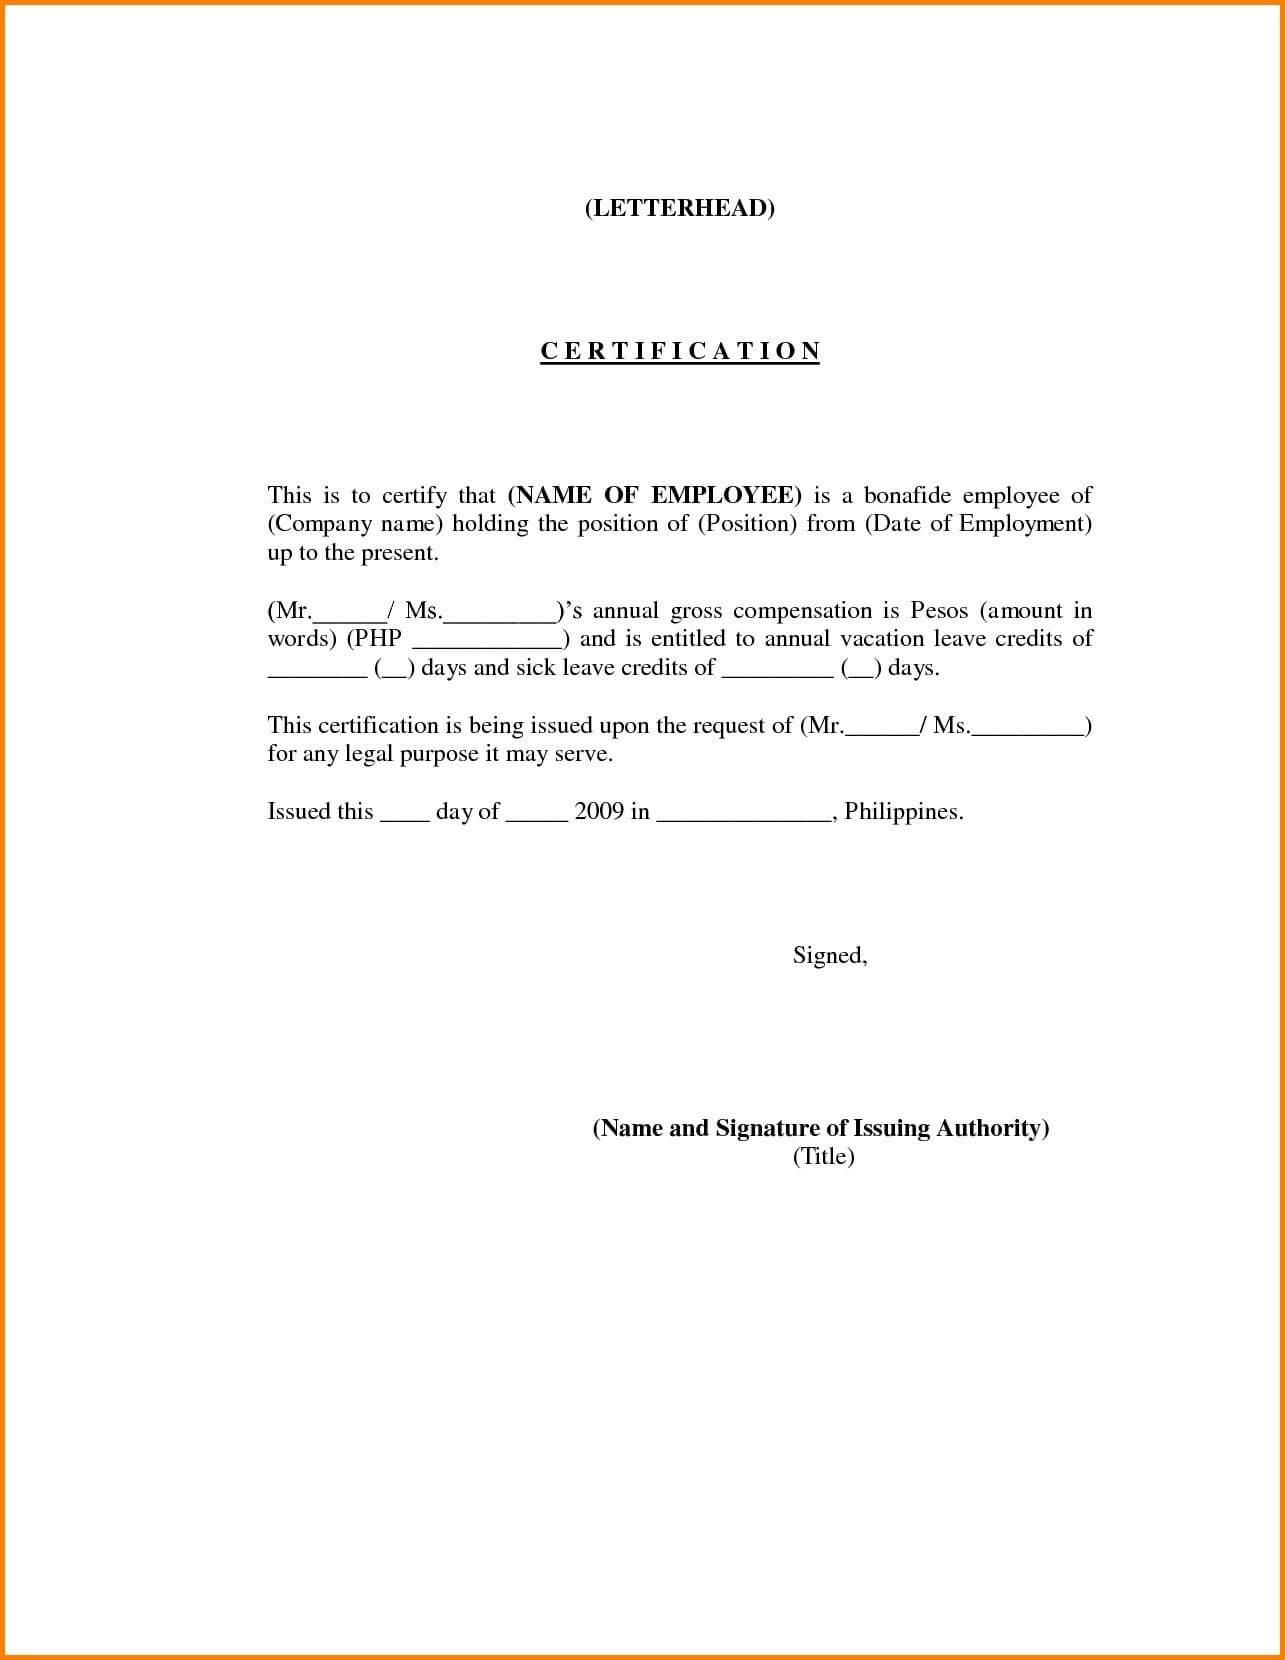 Sample Certificate Of Employment And Compensation – Forza With Regard To Template Of Certificate Of Employment